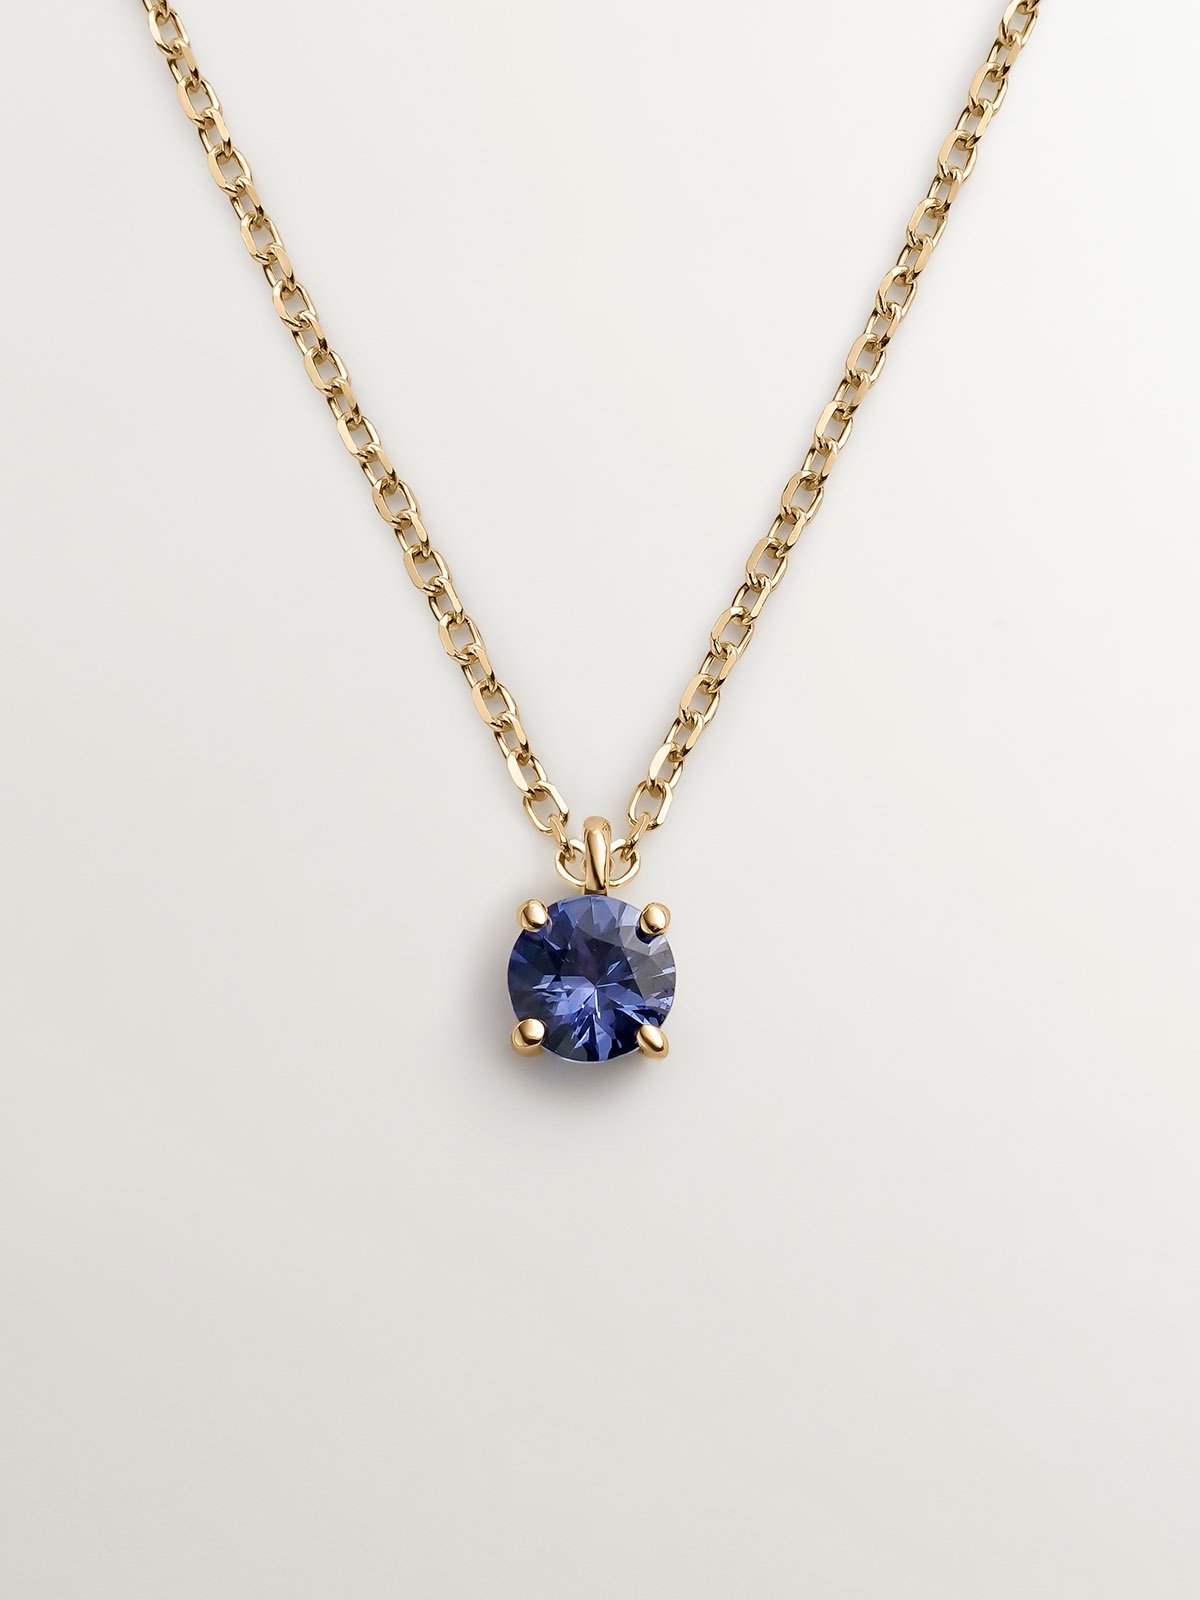 9K yellow gold pendant with blue sapphire